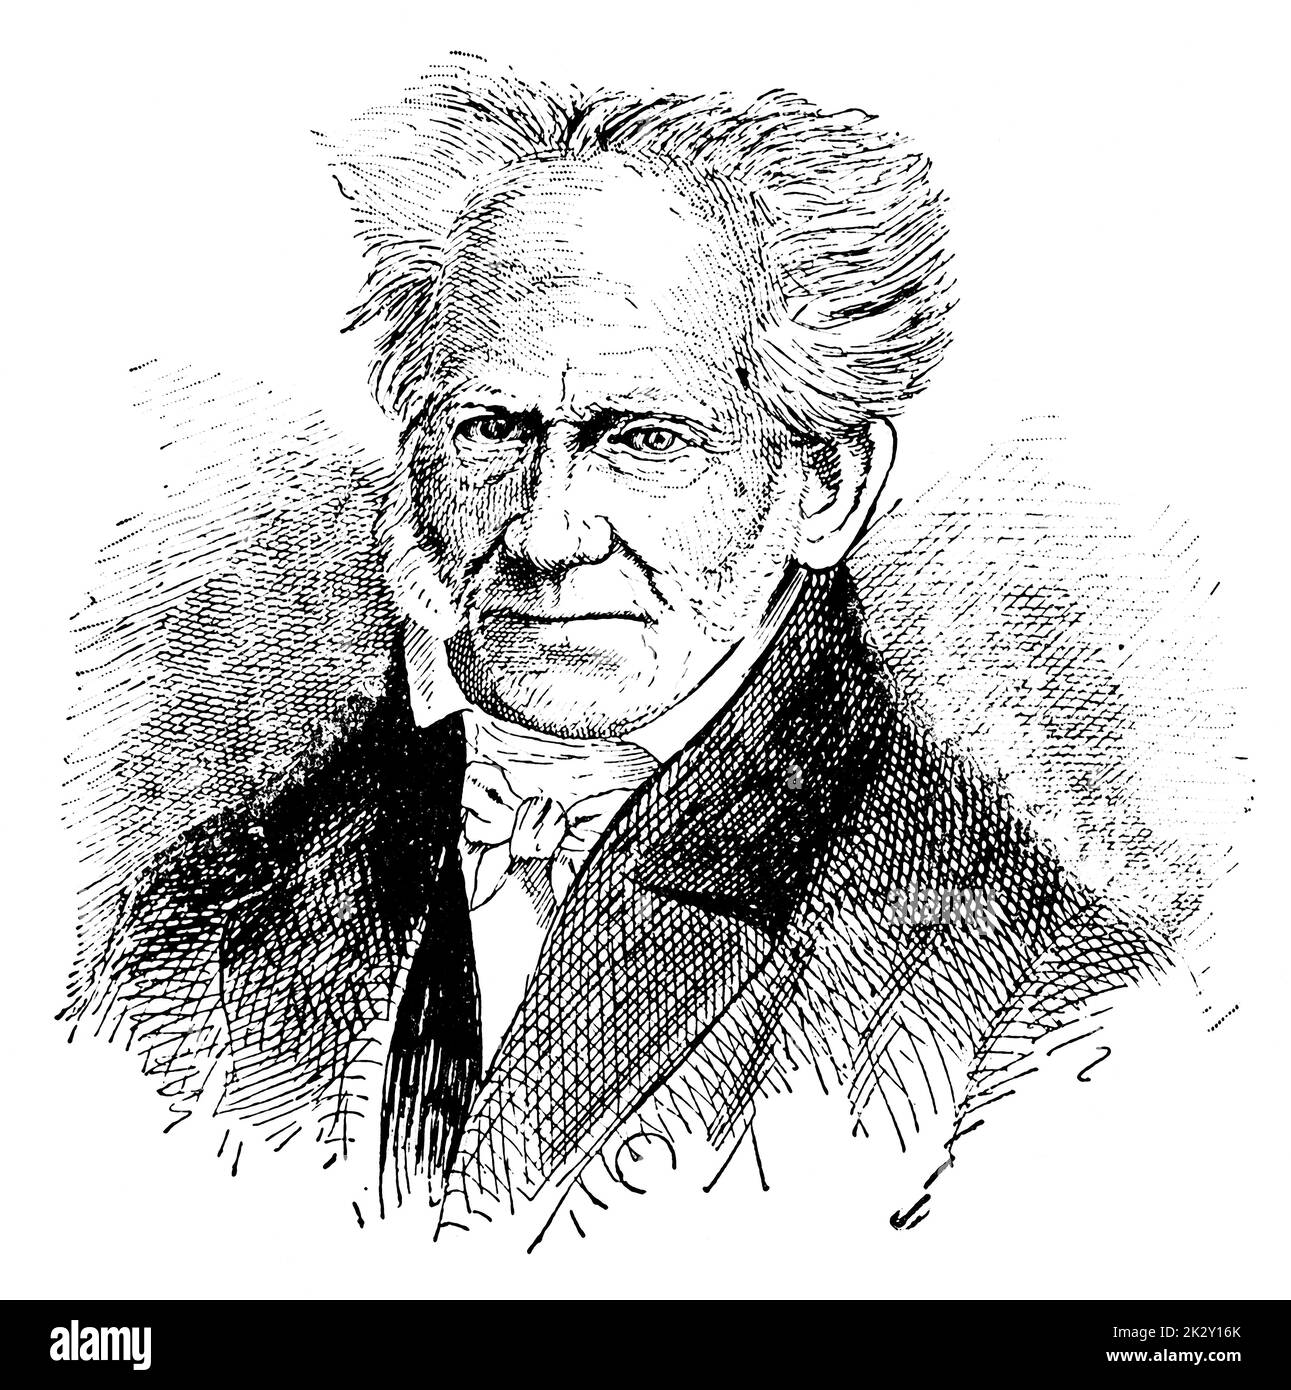 Portrait of Arthur Schopenhauer - a German philosopher. Illustration of the 19th century. Germany. White background. Stock Photo